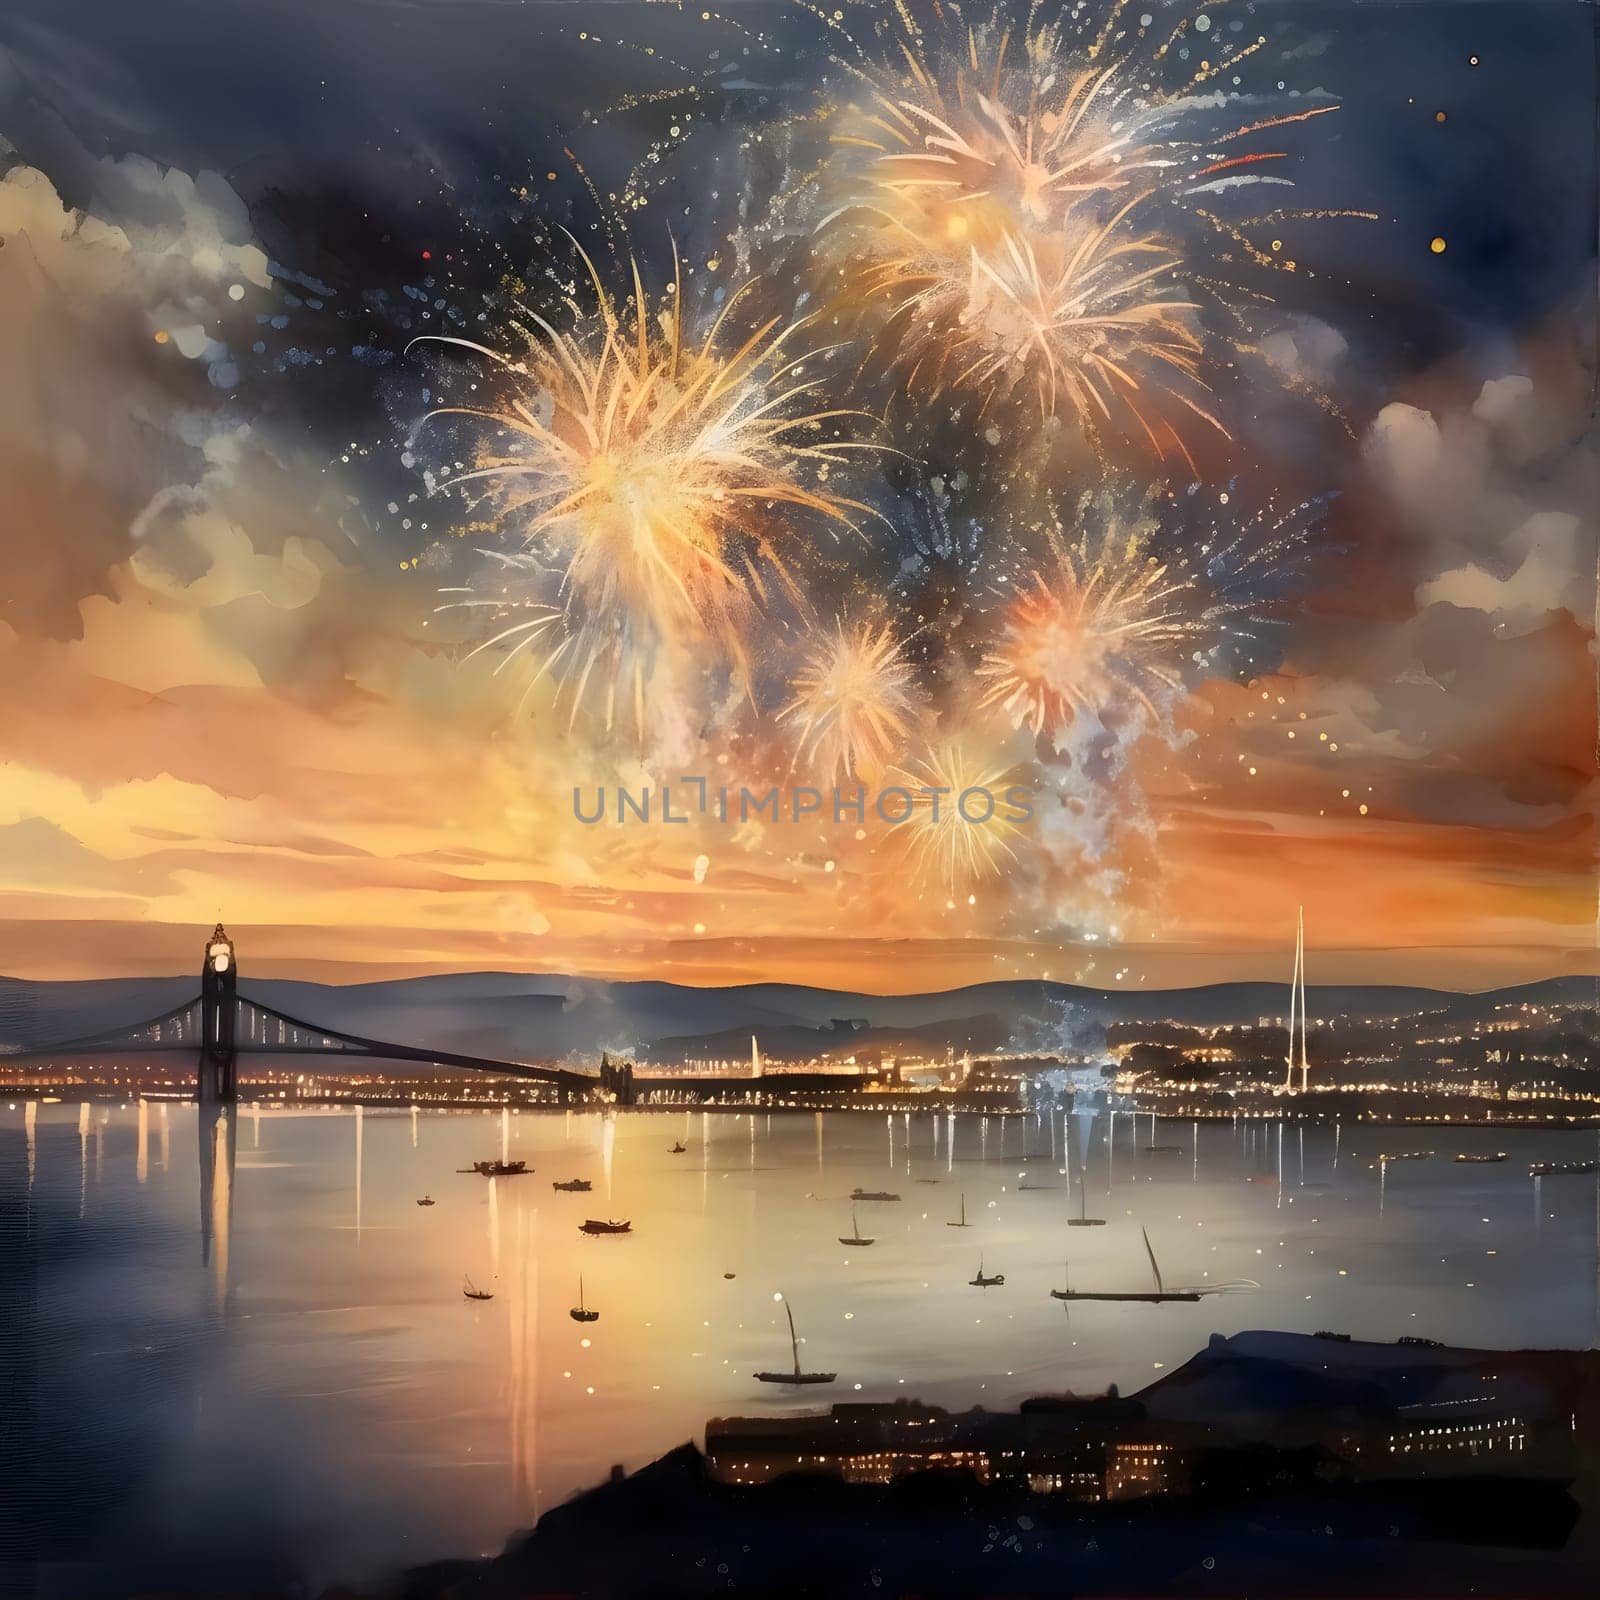 Illustration, fireworks show in the night sky bridge and floating boats. New Year's fun and festivities. A time of celebration and resolutions.